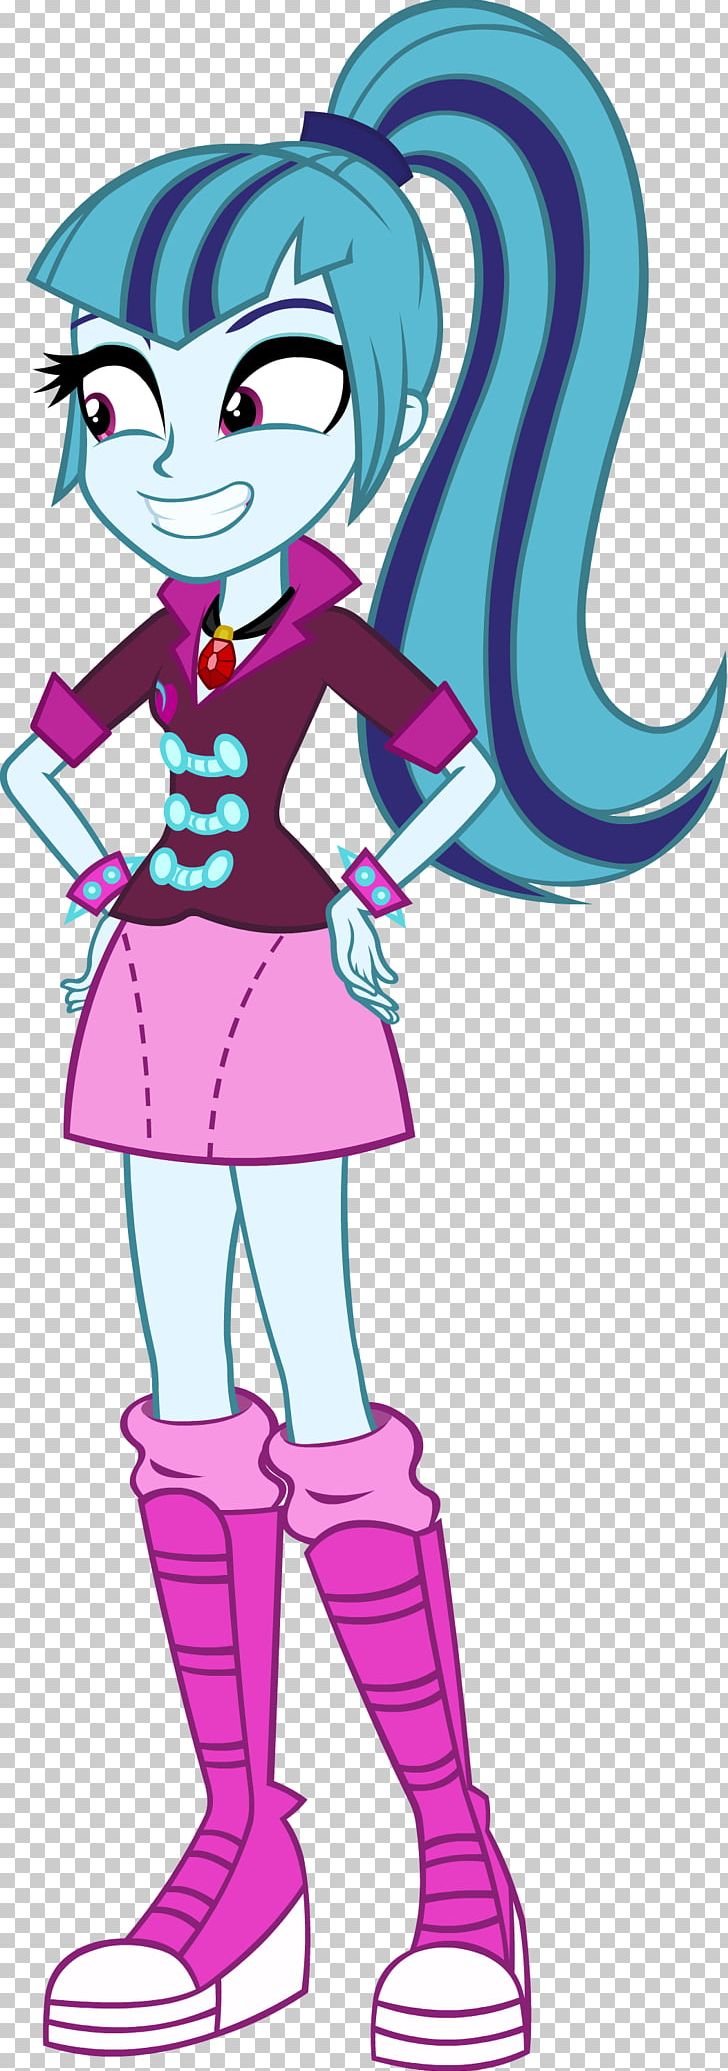 My Little Pony: Equestria Girls Rarity My Little Pony: Friendship Is Magic Fandom PNG, Clipart, Area, Cartoon, Equestria, Equestria Girls, Fictional Character Free PNG Download